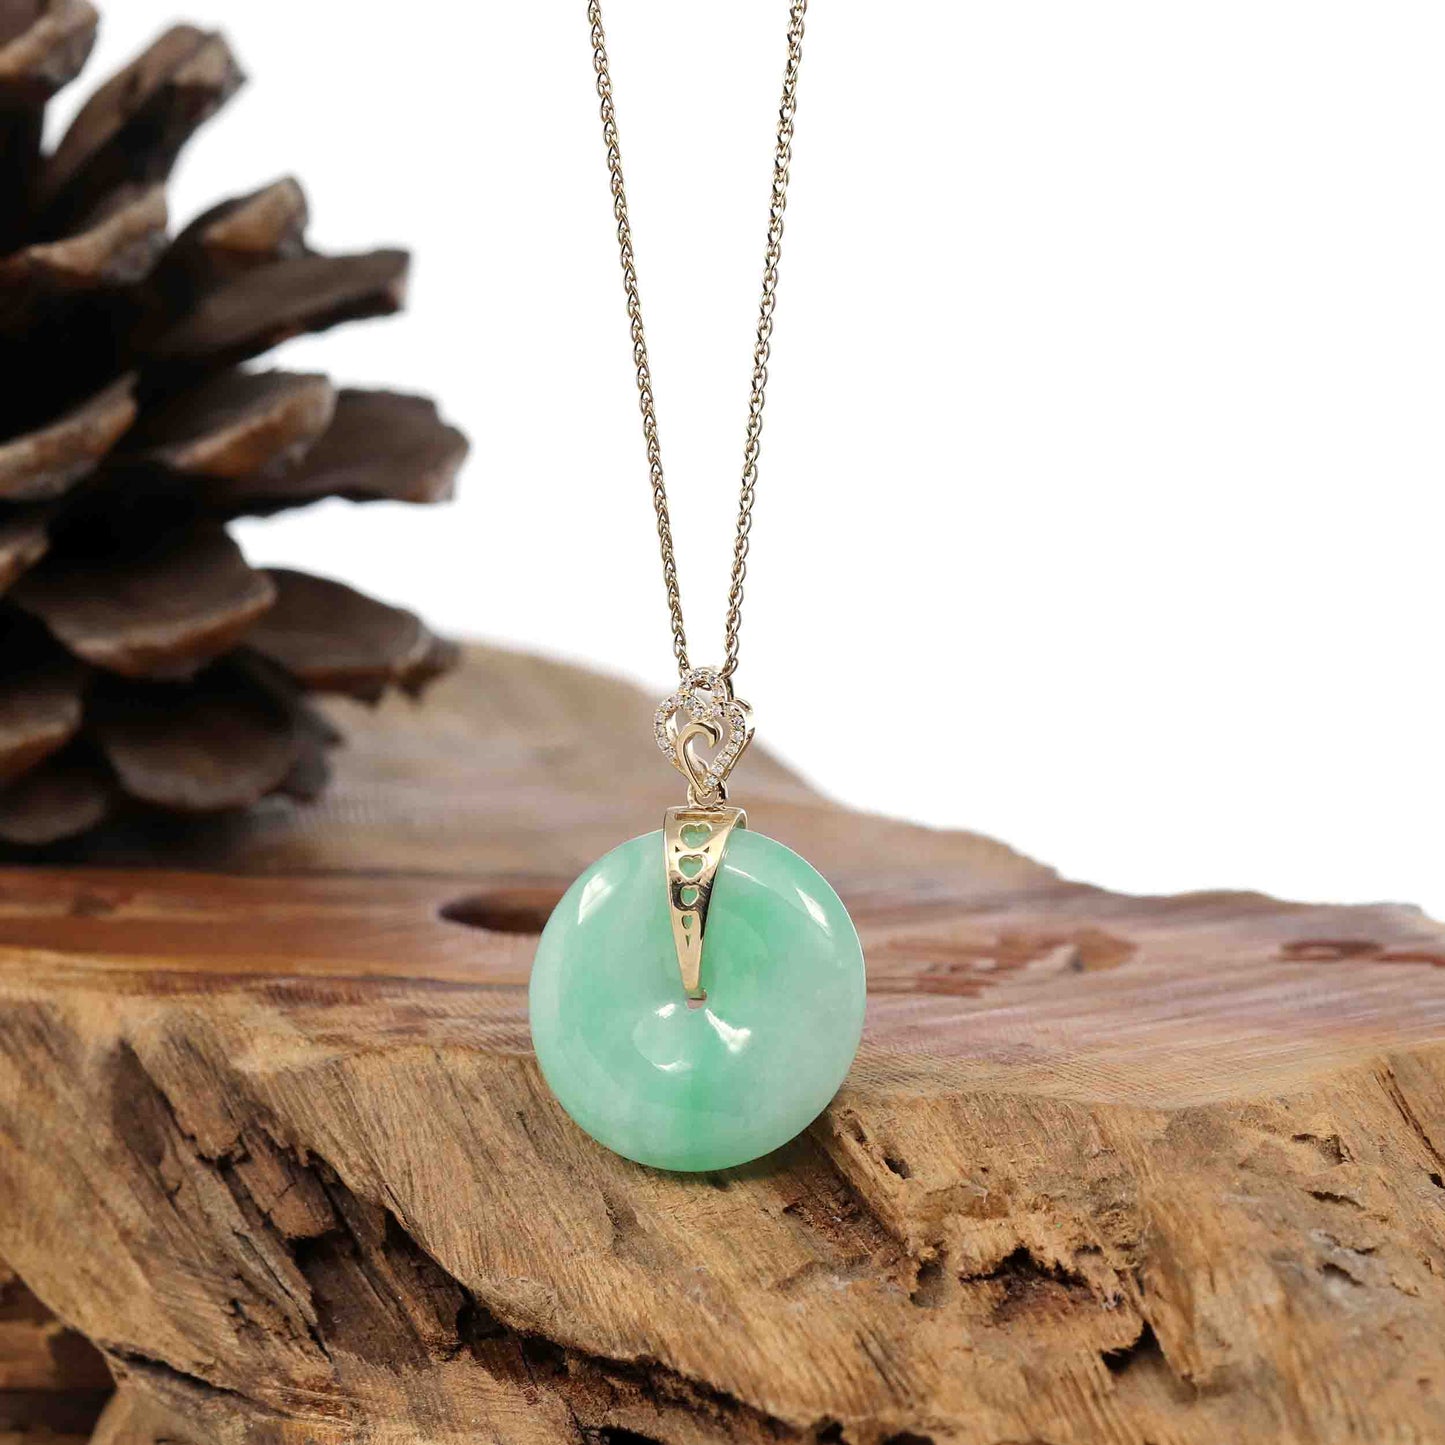 RealJade Co.® Gold Jadeite Jade Pendant Necklace Pendant Only 14K Yellow Gold "Good Luck Button" Necklace Green Jadeite Jade Lucky KouKou Pendant Necklace